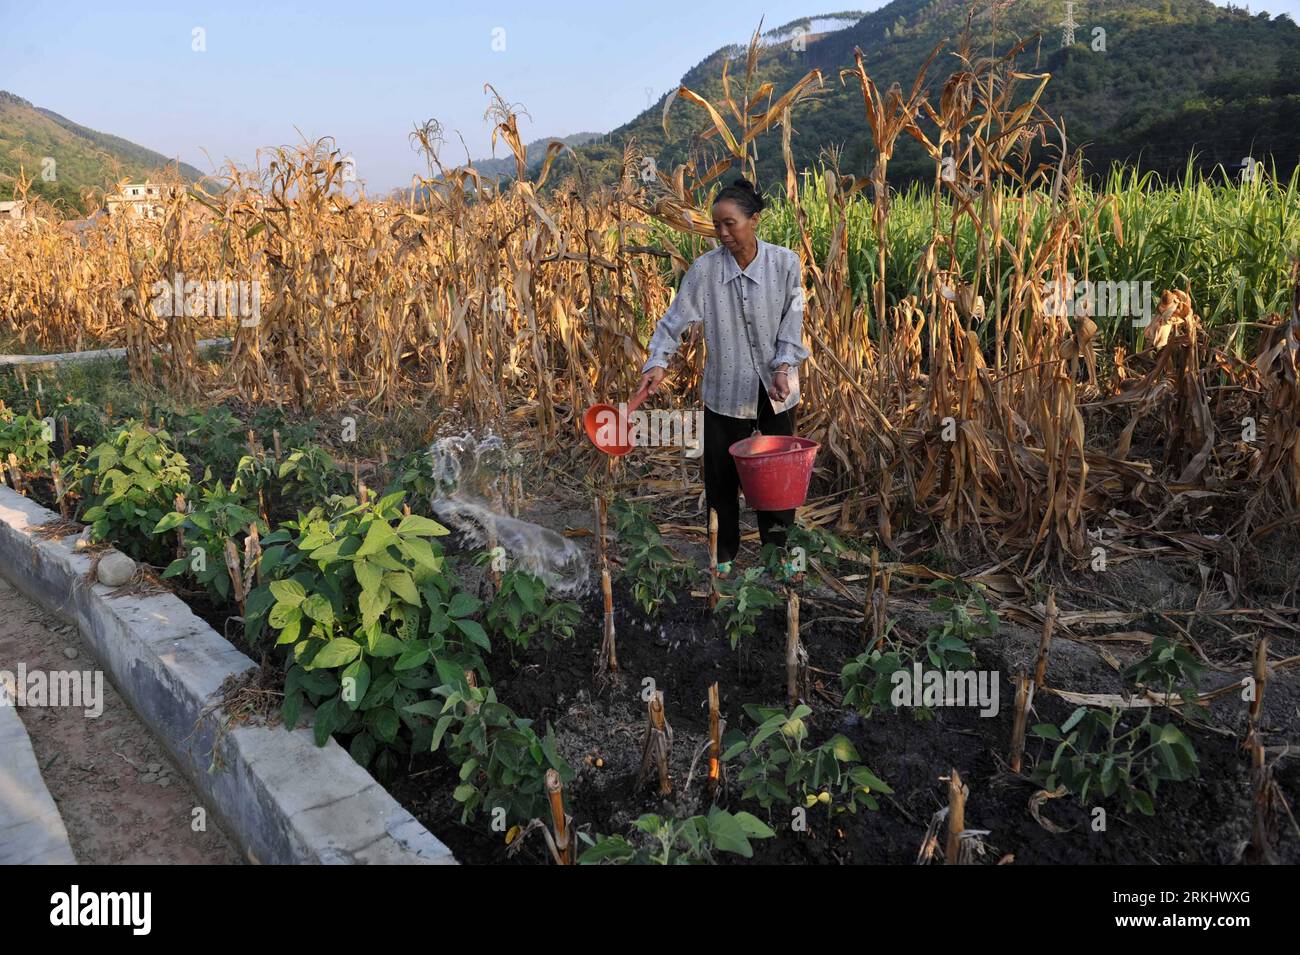 Bildnummer: 55913975  Datum: 07.09.2011  Copyright: imago/Xinhua (110908) -- TIANLIN, Sept. 8, 2011 (Xinhua) -- A villager waters croplands in Pingman Village of Tianlin County, south China s Guangxi Zhuang Autonomous Region, Sept. 7, 2011. A total of 190,000 mu (about 12,667 hectares) of crops here have been affected by a serious drought, with 25,000 mu (about 1,667 hectares) totally fruitless. The drought has affected several counties as the average precipitation from July 1 to the end of August has fallen by 50 percent year on year to 228 millimeters, the least since 1951. (Xinhua/Zhou Hua) Stock Photo